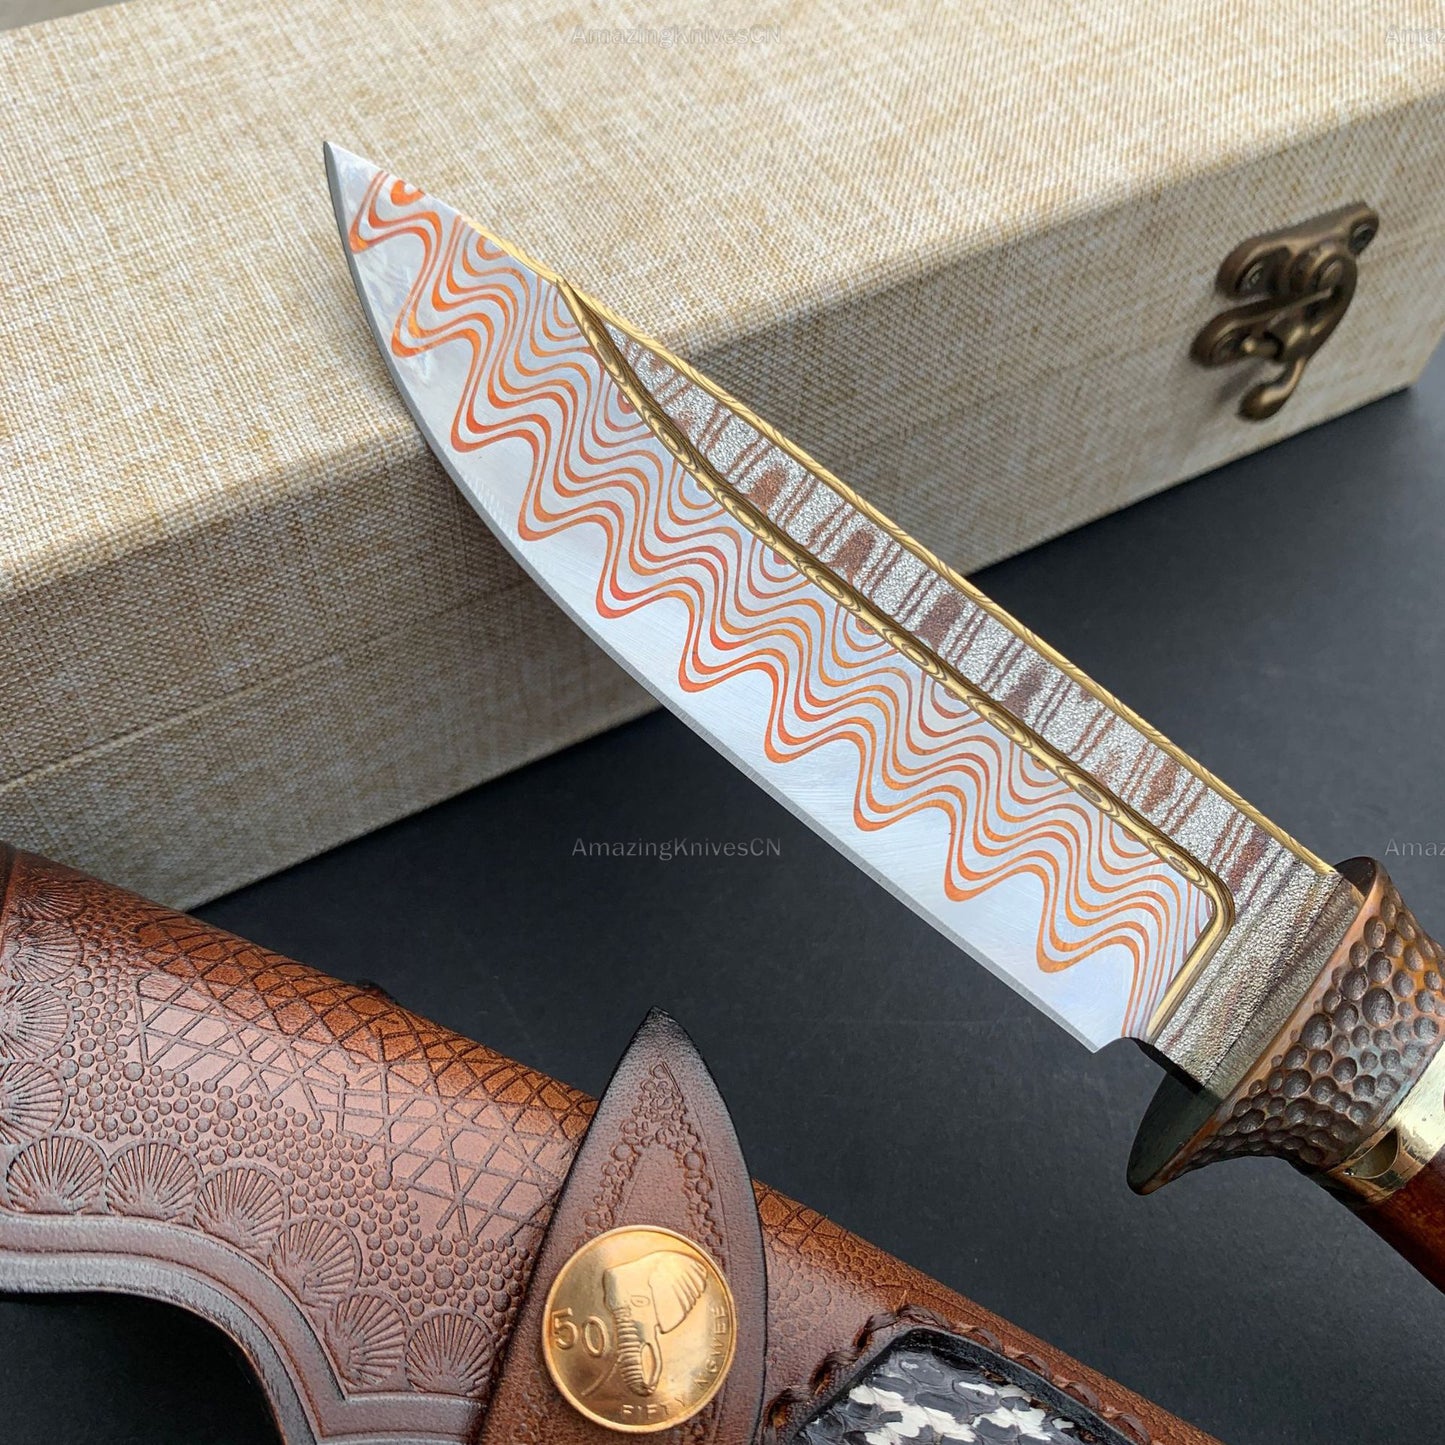 Collectible Handcrafted Copper Damascus Steel Knife Full Tang Desert Ironwood - AK-HT0910-1